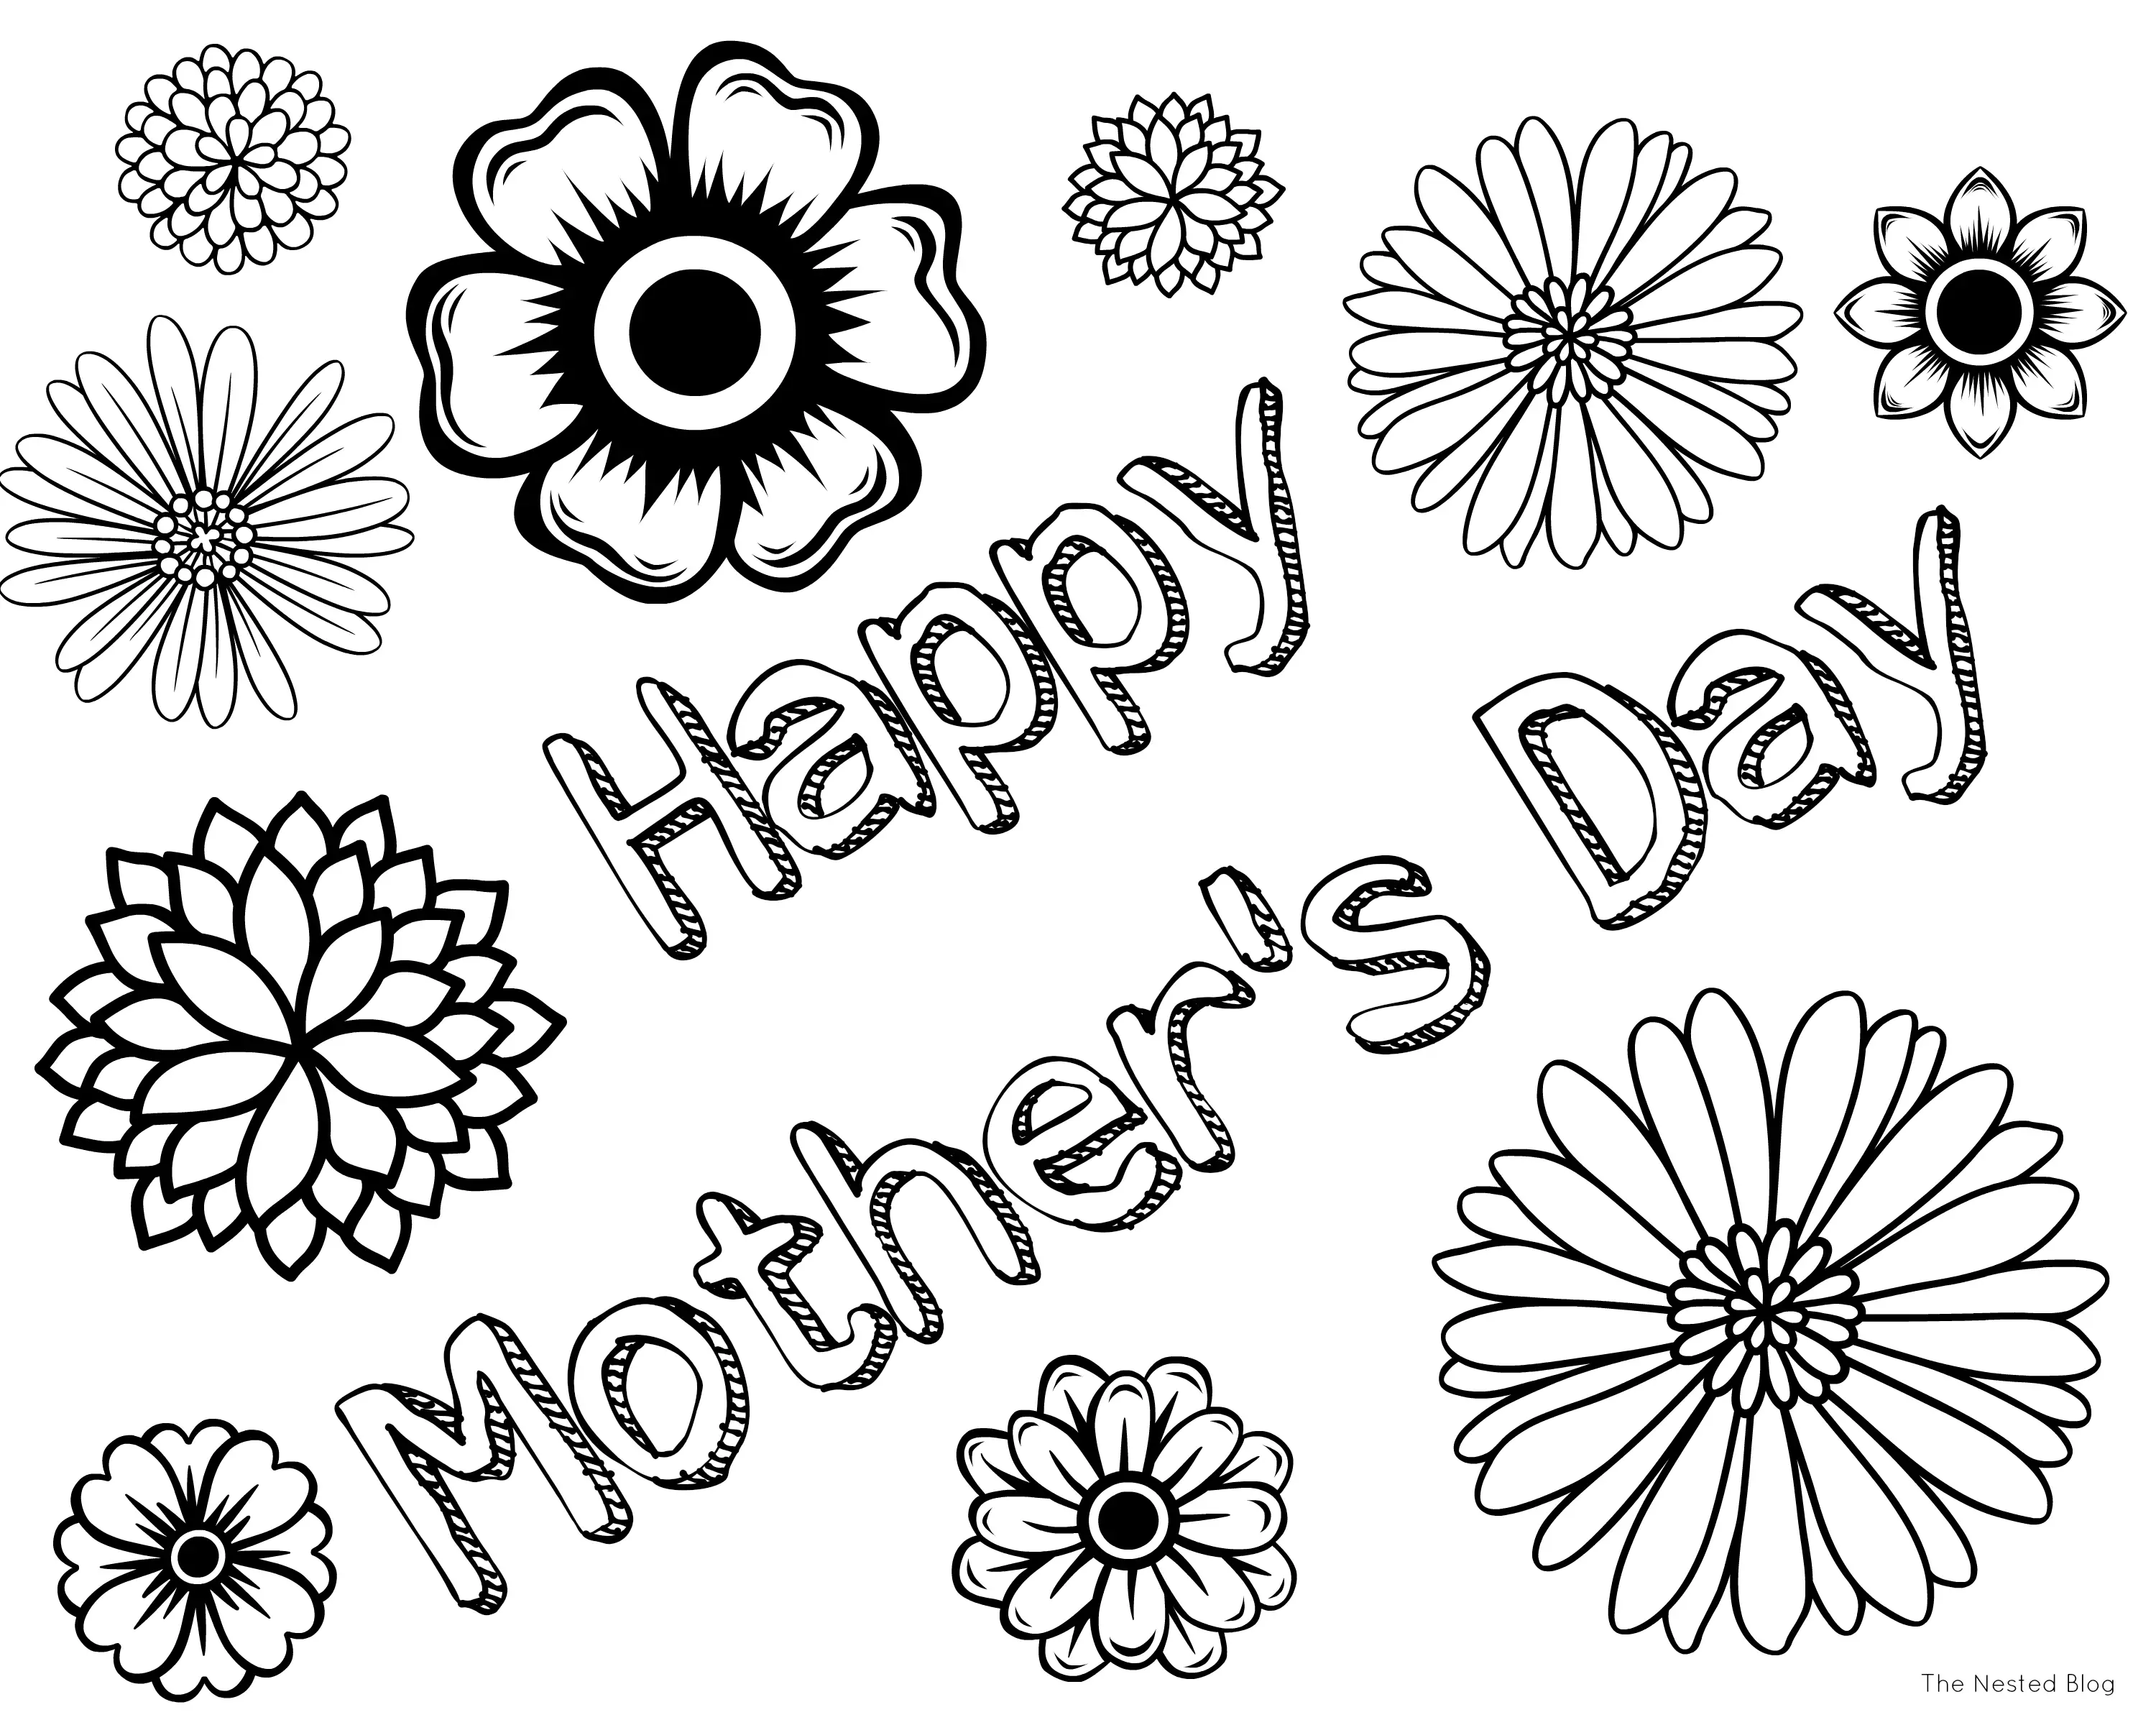 30 Free and Printable Mother’s Day Coloring Cards Kitty Baby Love